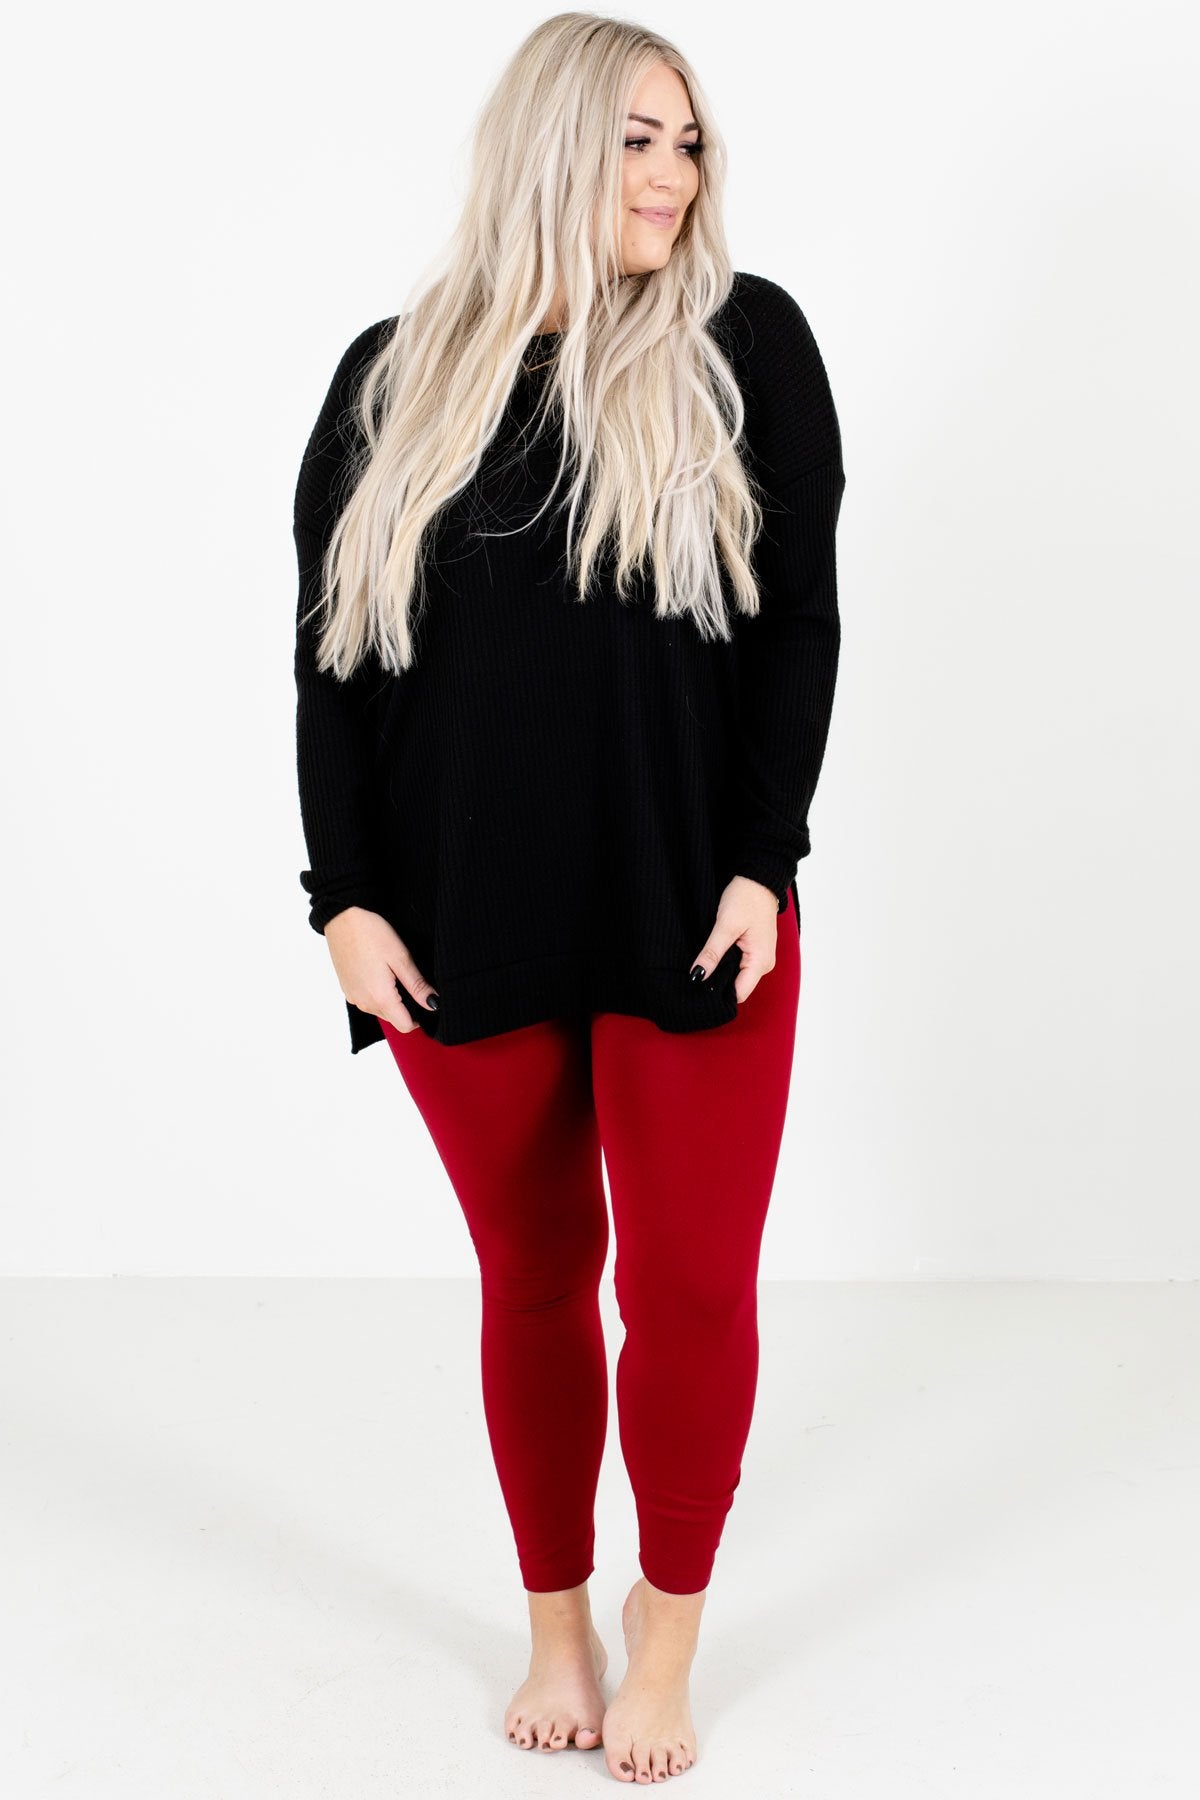  Black Tights For Women Plus Size Fleece Lined